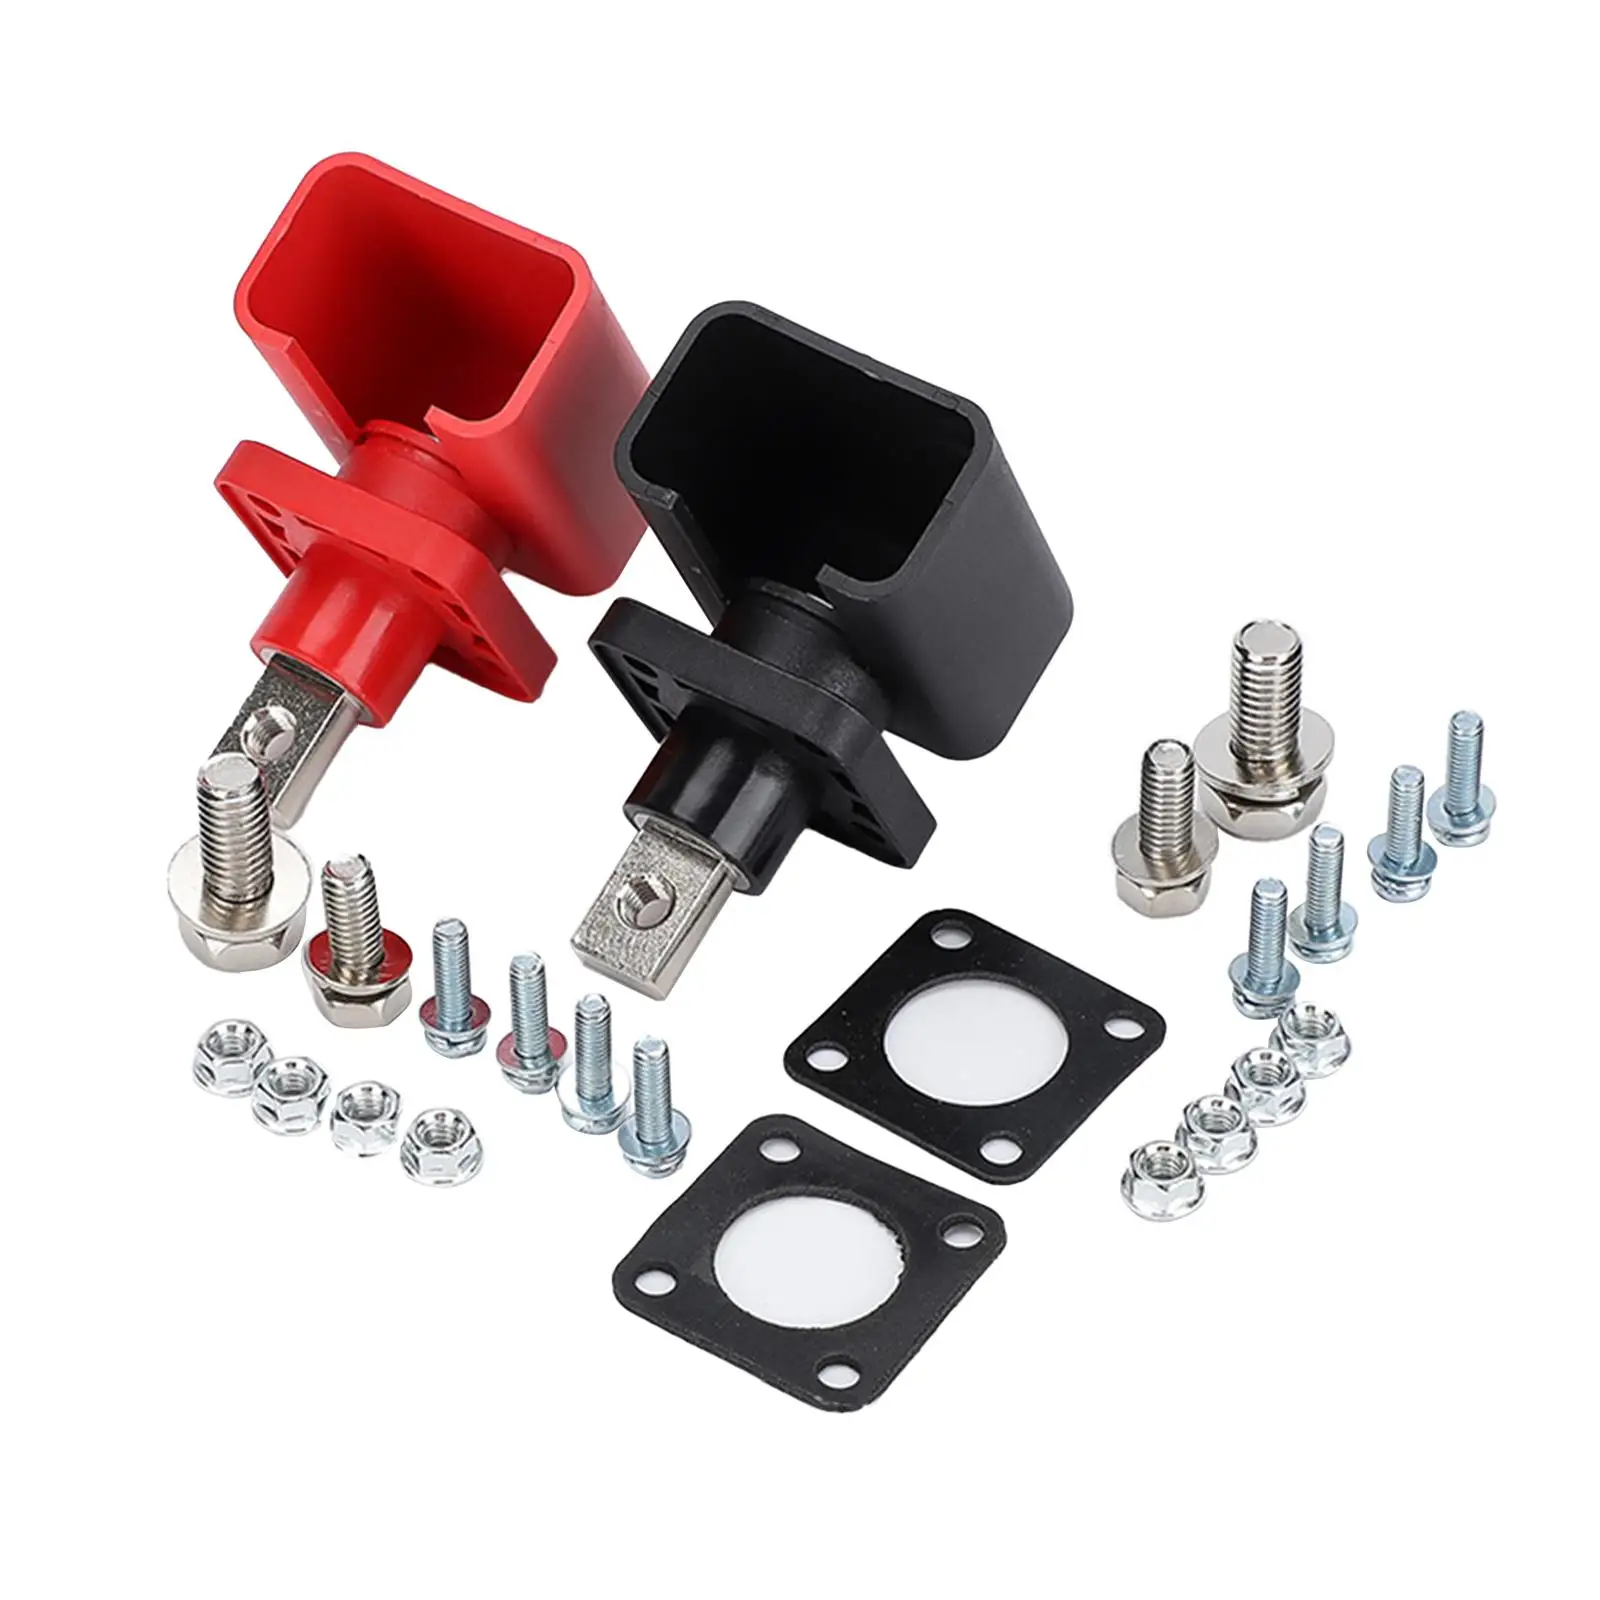 2 Pieces Battery Terminal Connector Compatible Protector Easily Install Quick Disconnect High Current for Truck Boat ATV Car